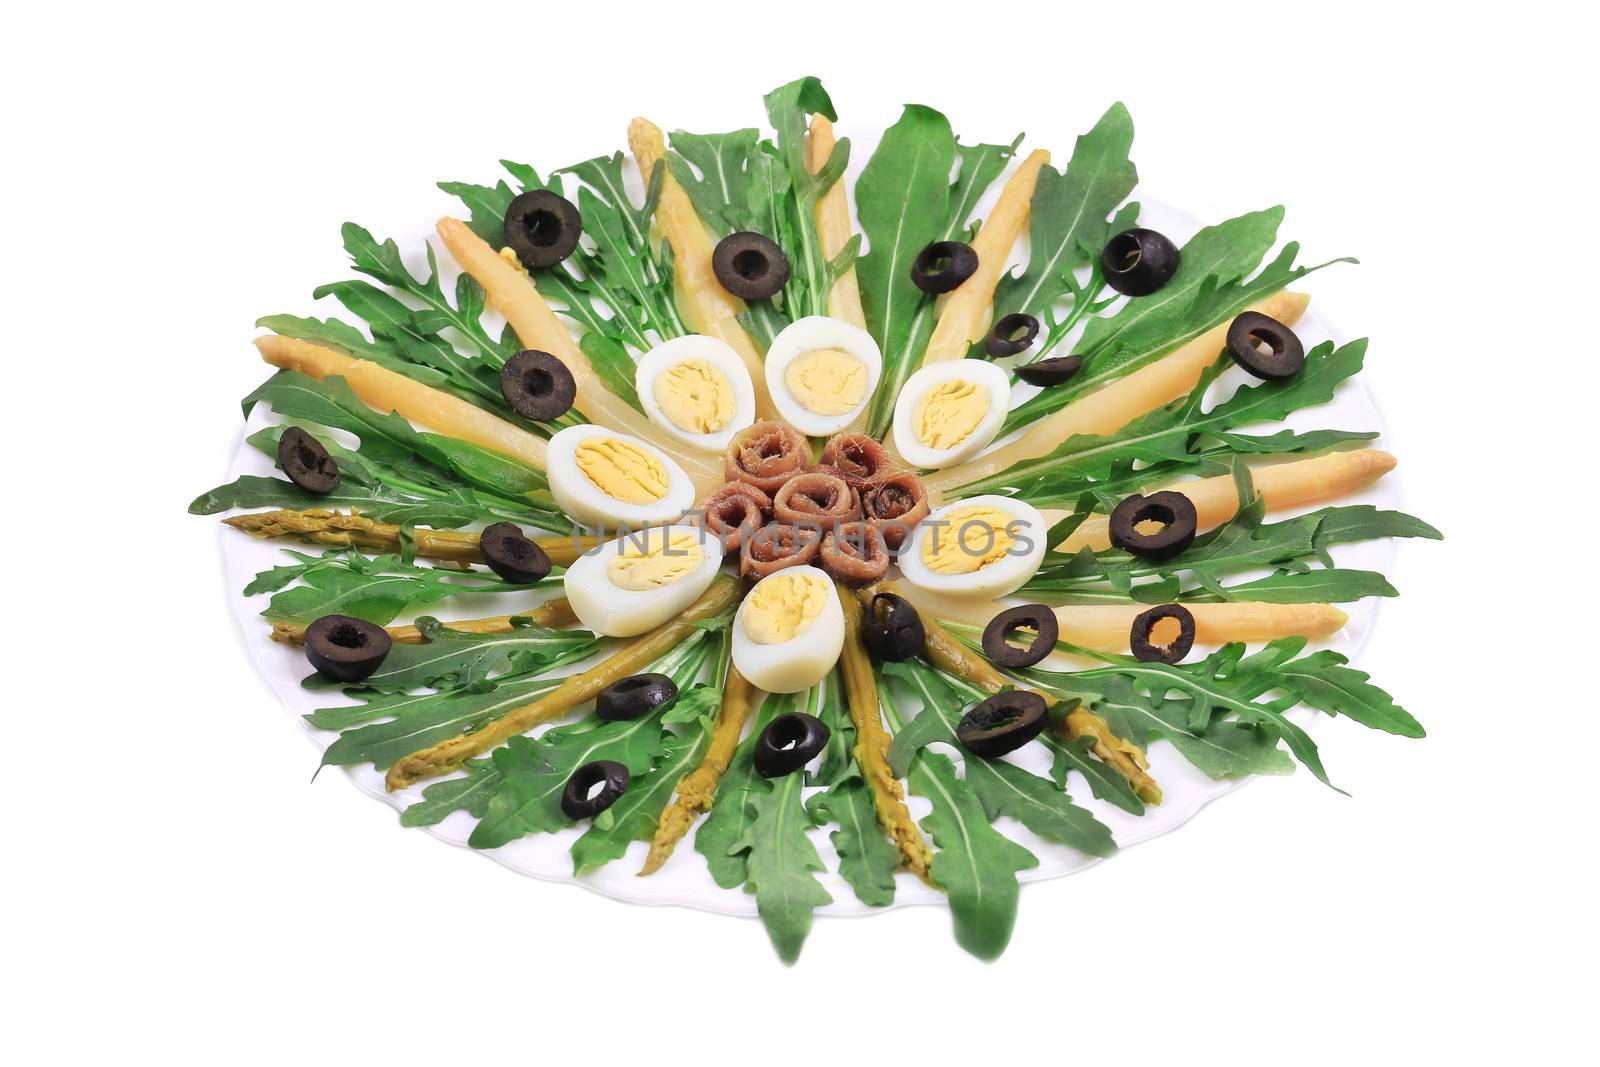 Asparagus salad with anchovies. by indigolotos